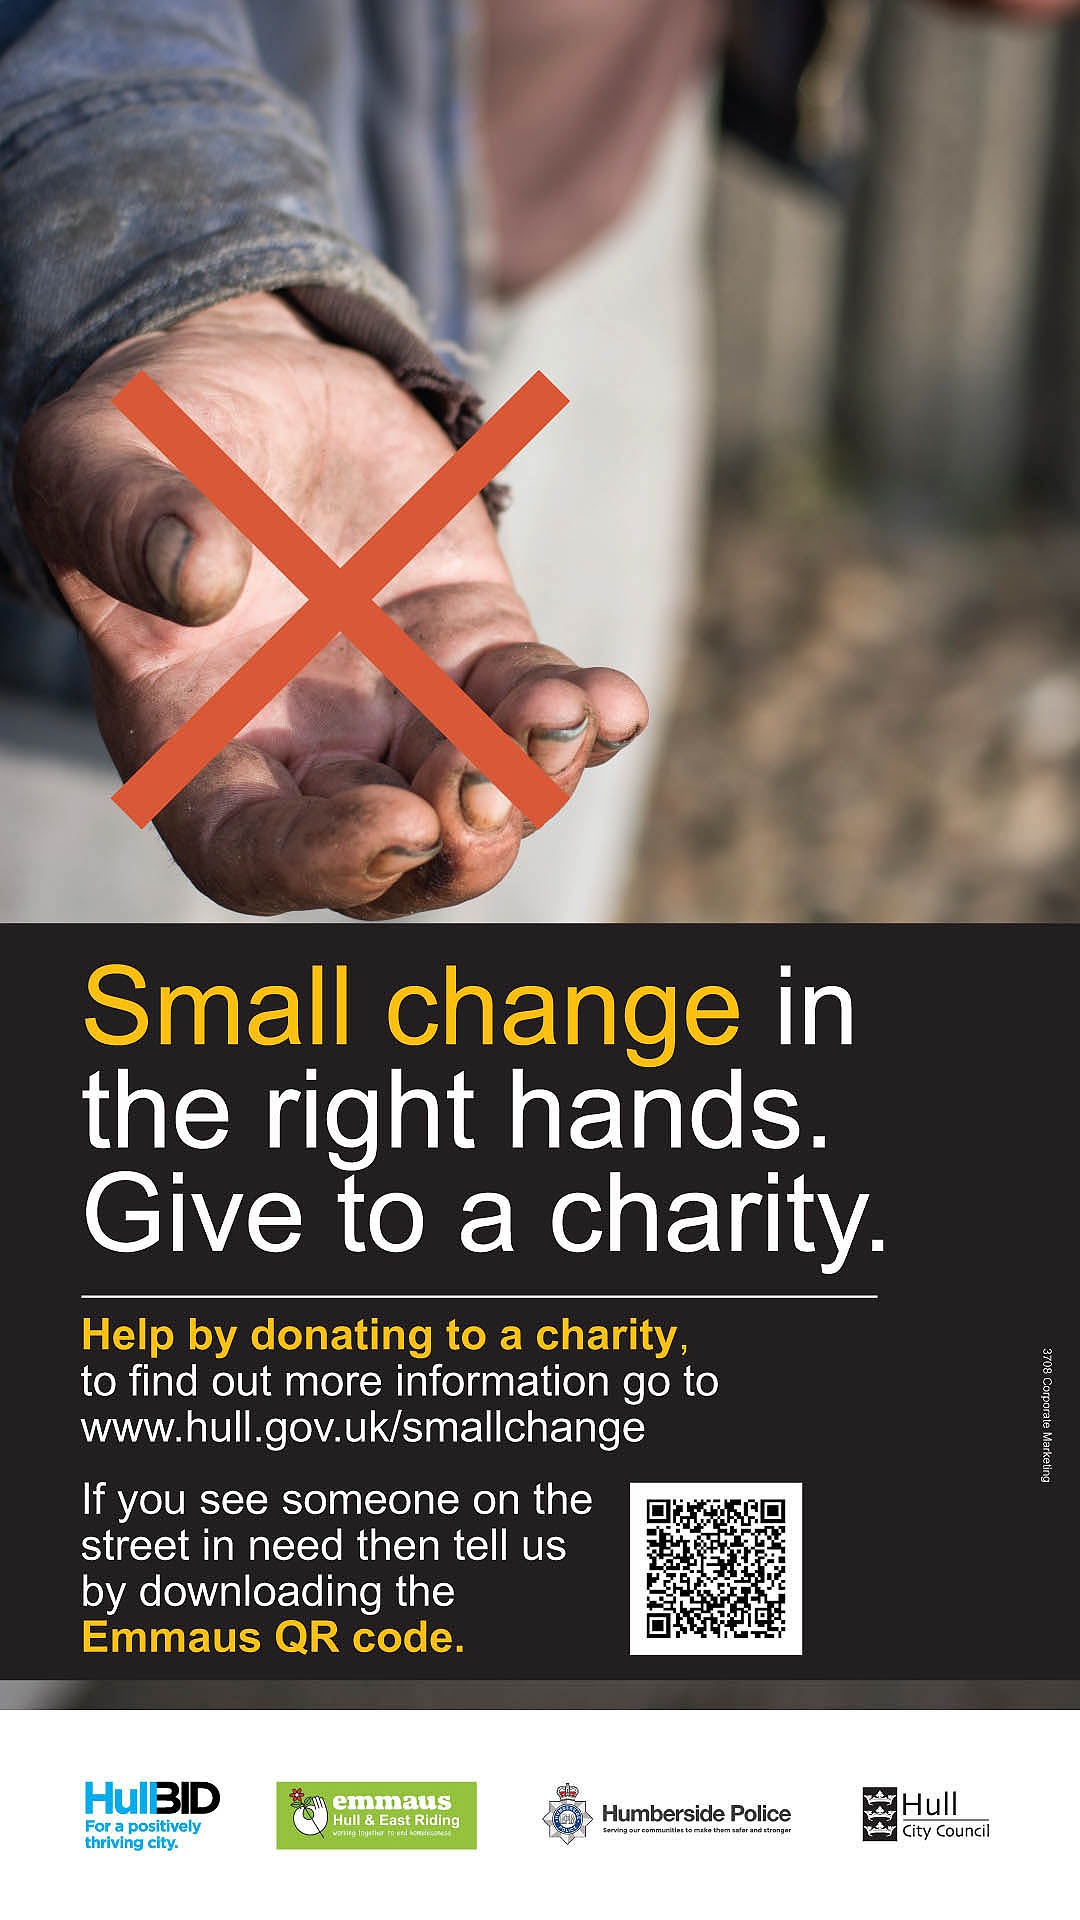 The Small Change In The Right Hands campaign, advises people to consider giving to registered charities instead of those who are begging.